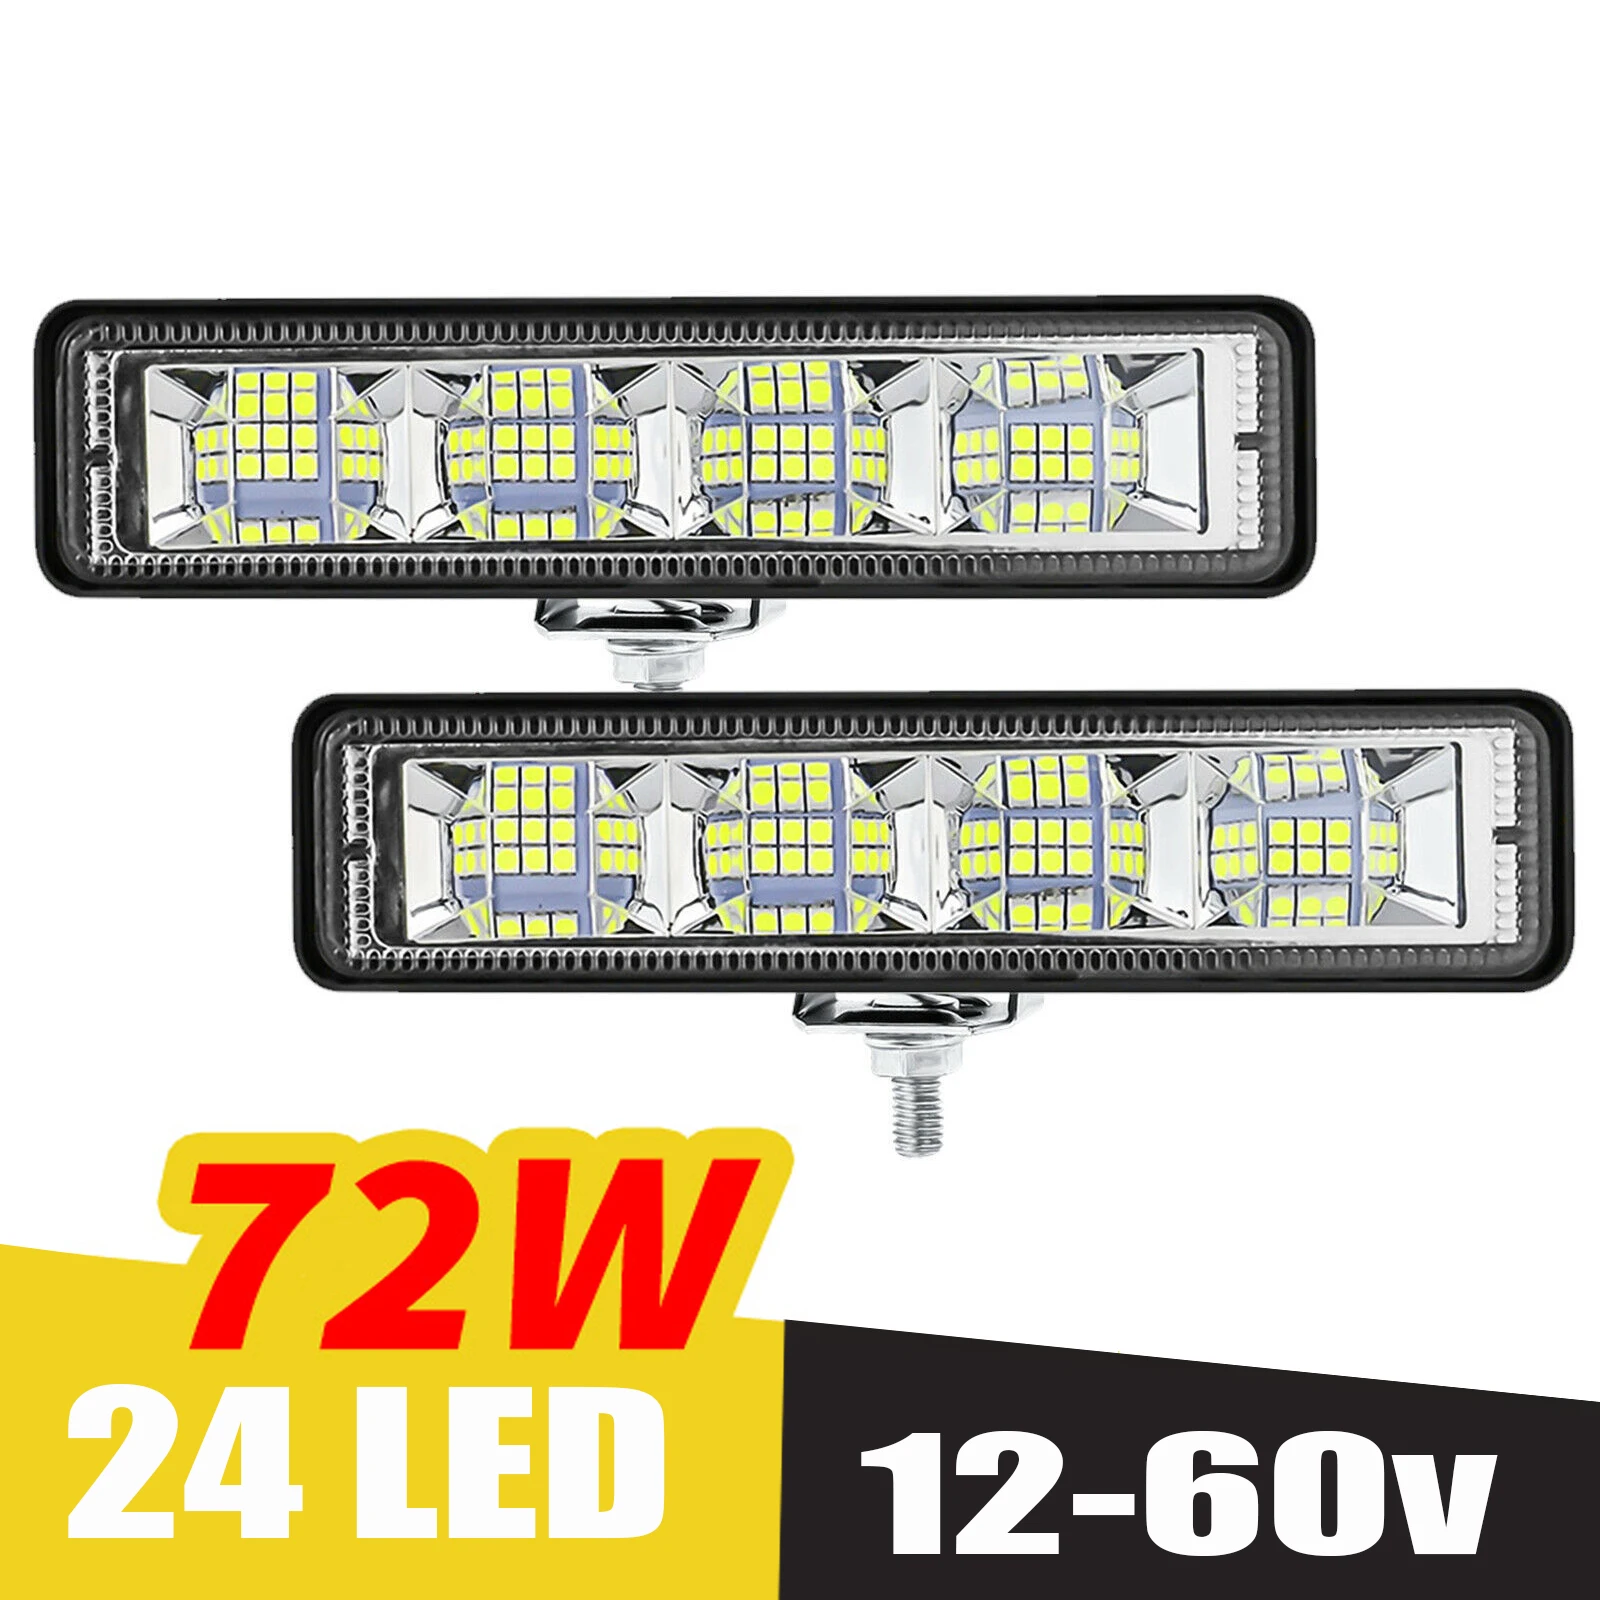 Round Led Work Lights Bar 72W Led Bar Offroad Car Roof Spotlights 12-36V  Worklight for 4x4 Trailer Truck Boat Offroad Accessorie - AliExpress